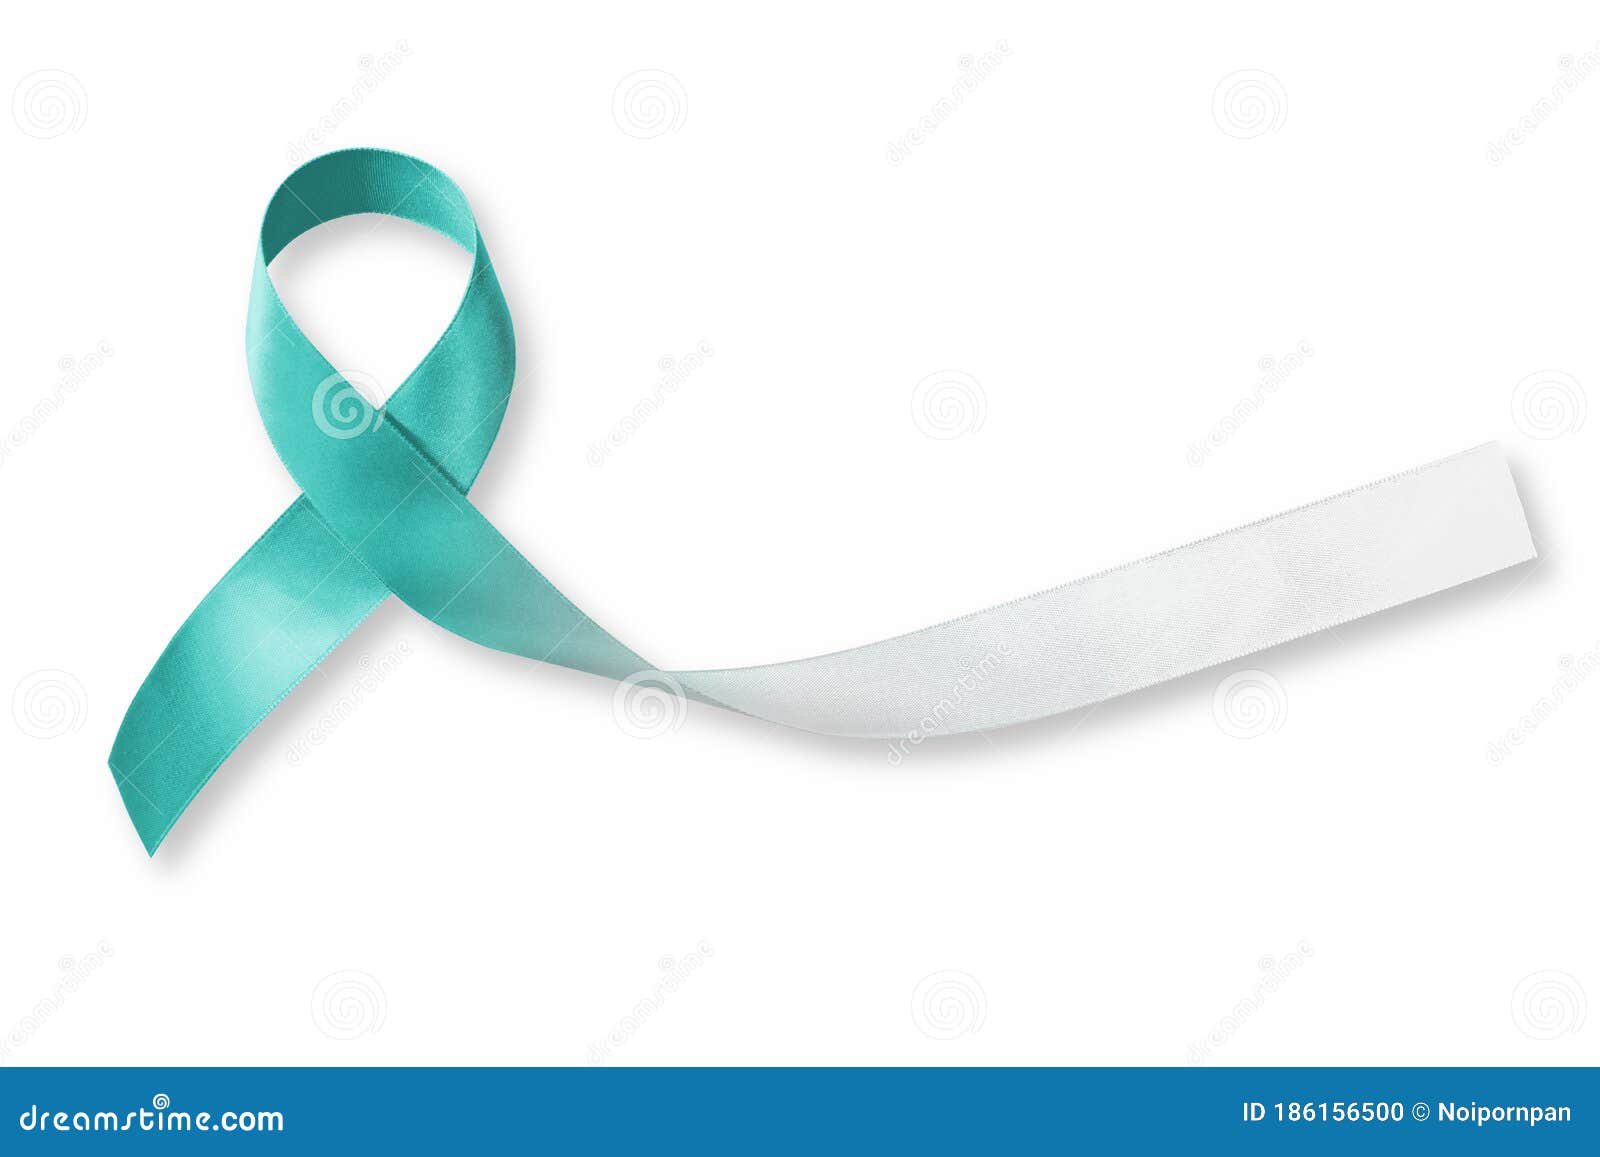 teal and white ribbon  on white background for raising awareness on cervical cancer